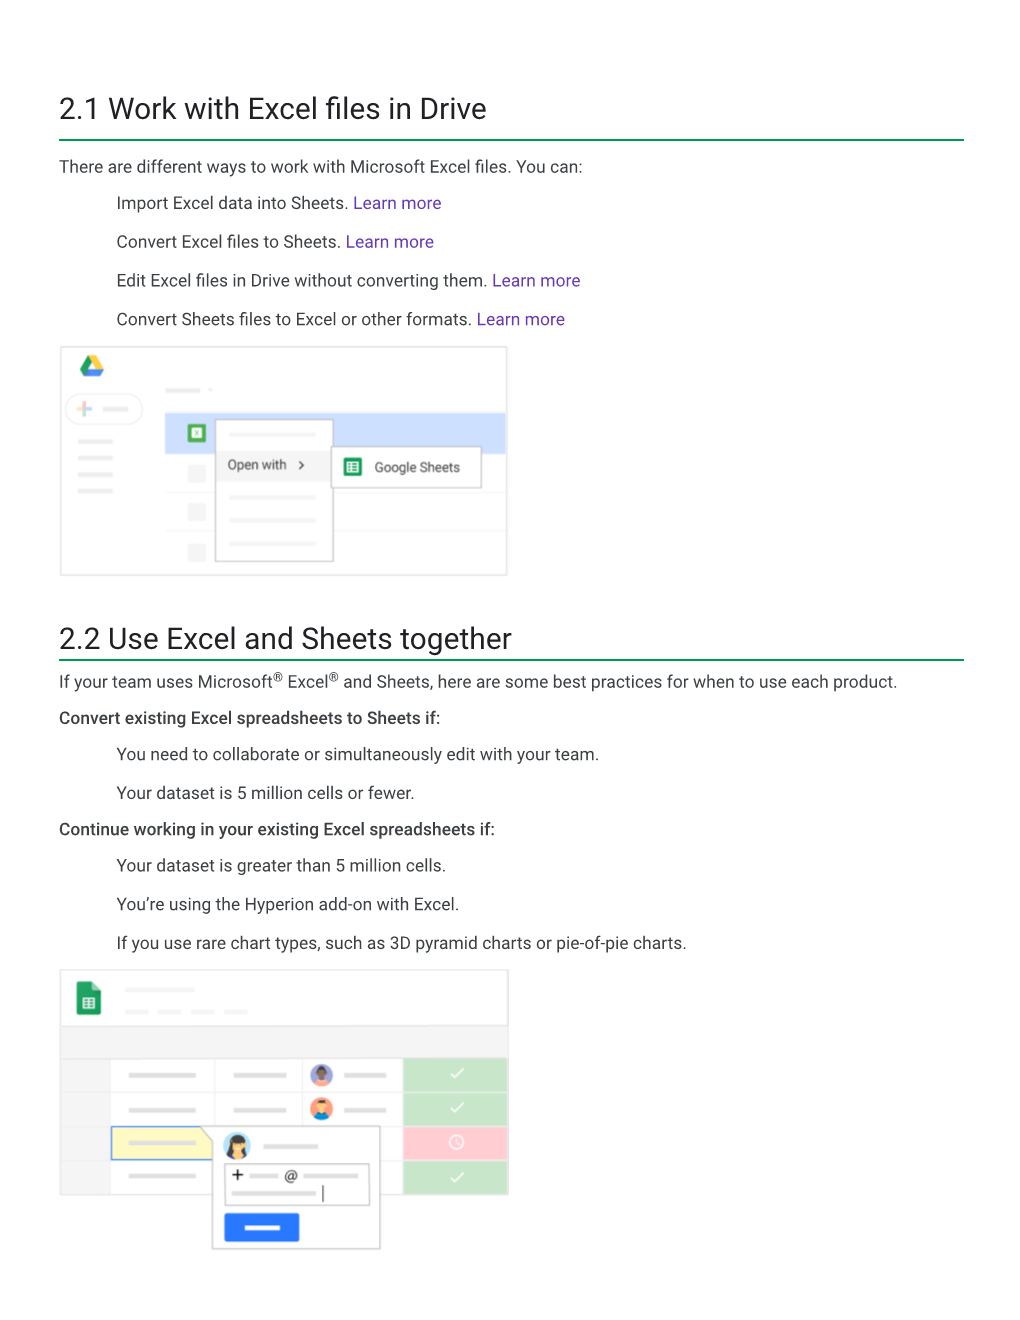 2.1 Work with Excel Files in Drive 2.2 Use Excel and Sheets Together